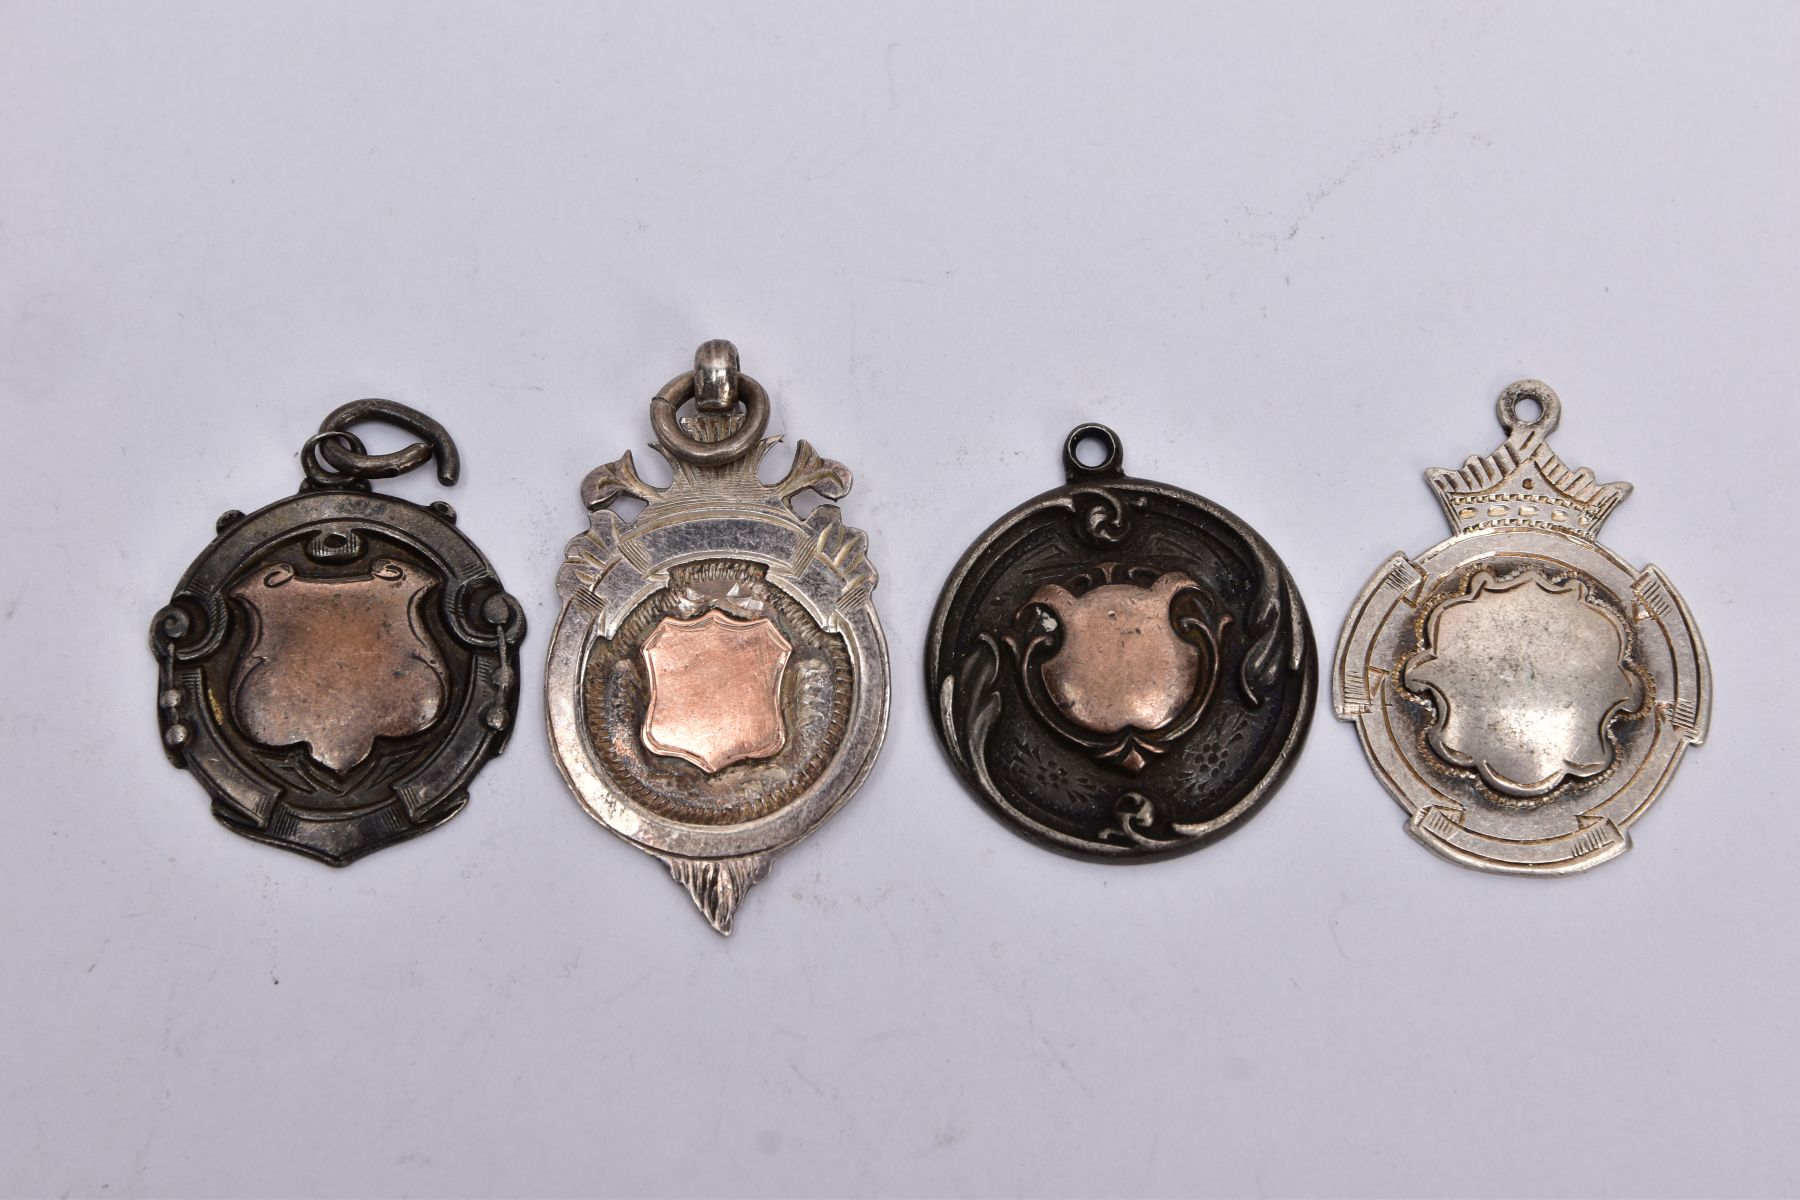 FOUR SILVER MEDAL FOBS, each of a circular form with vacant cartouches, two engraved to the